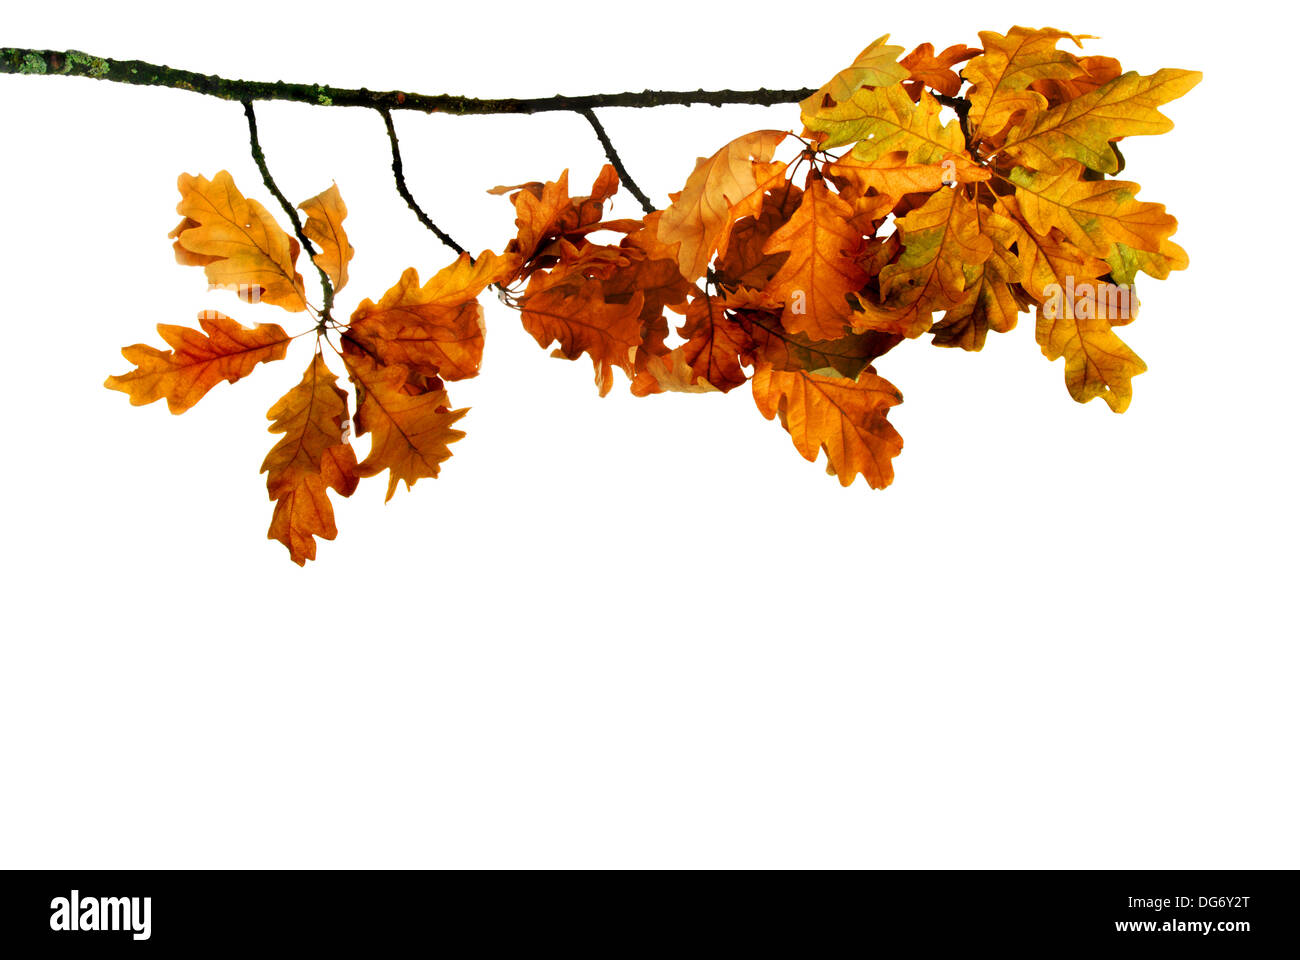 Oak branch with dry yellow leaves on a white background Stock Photo